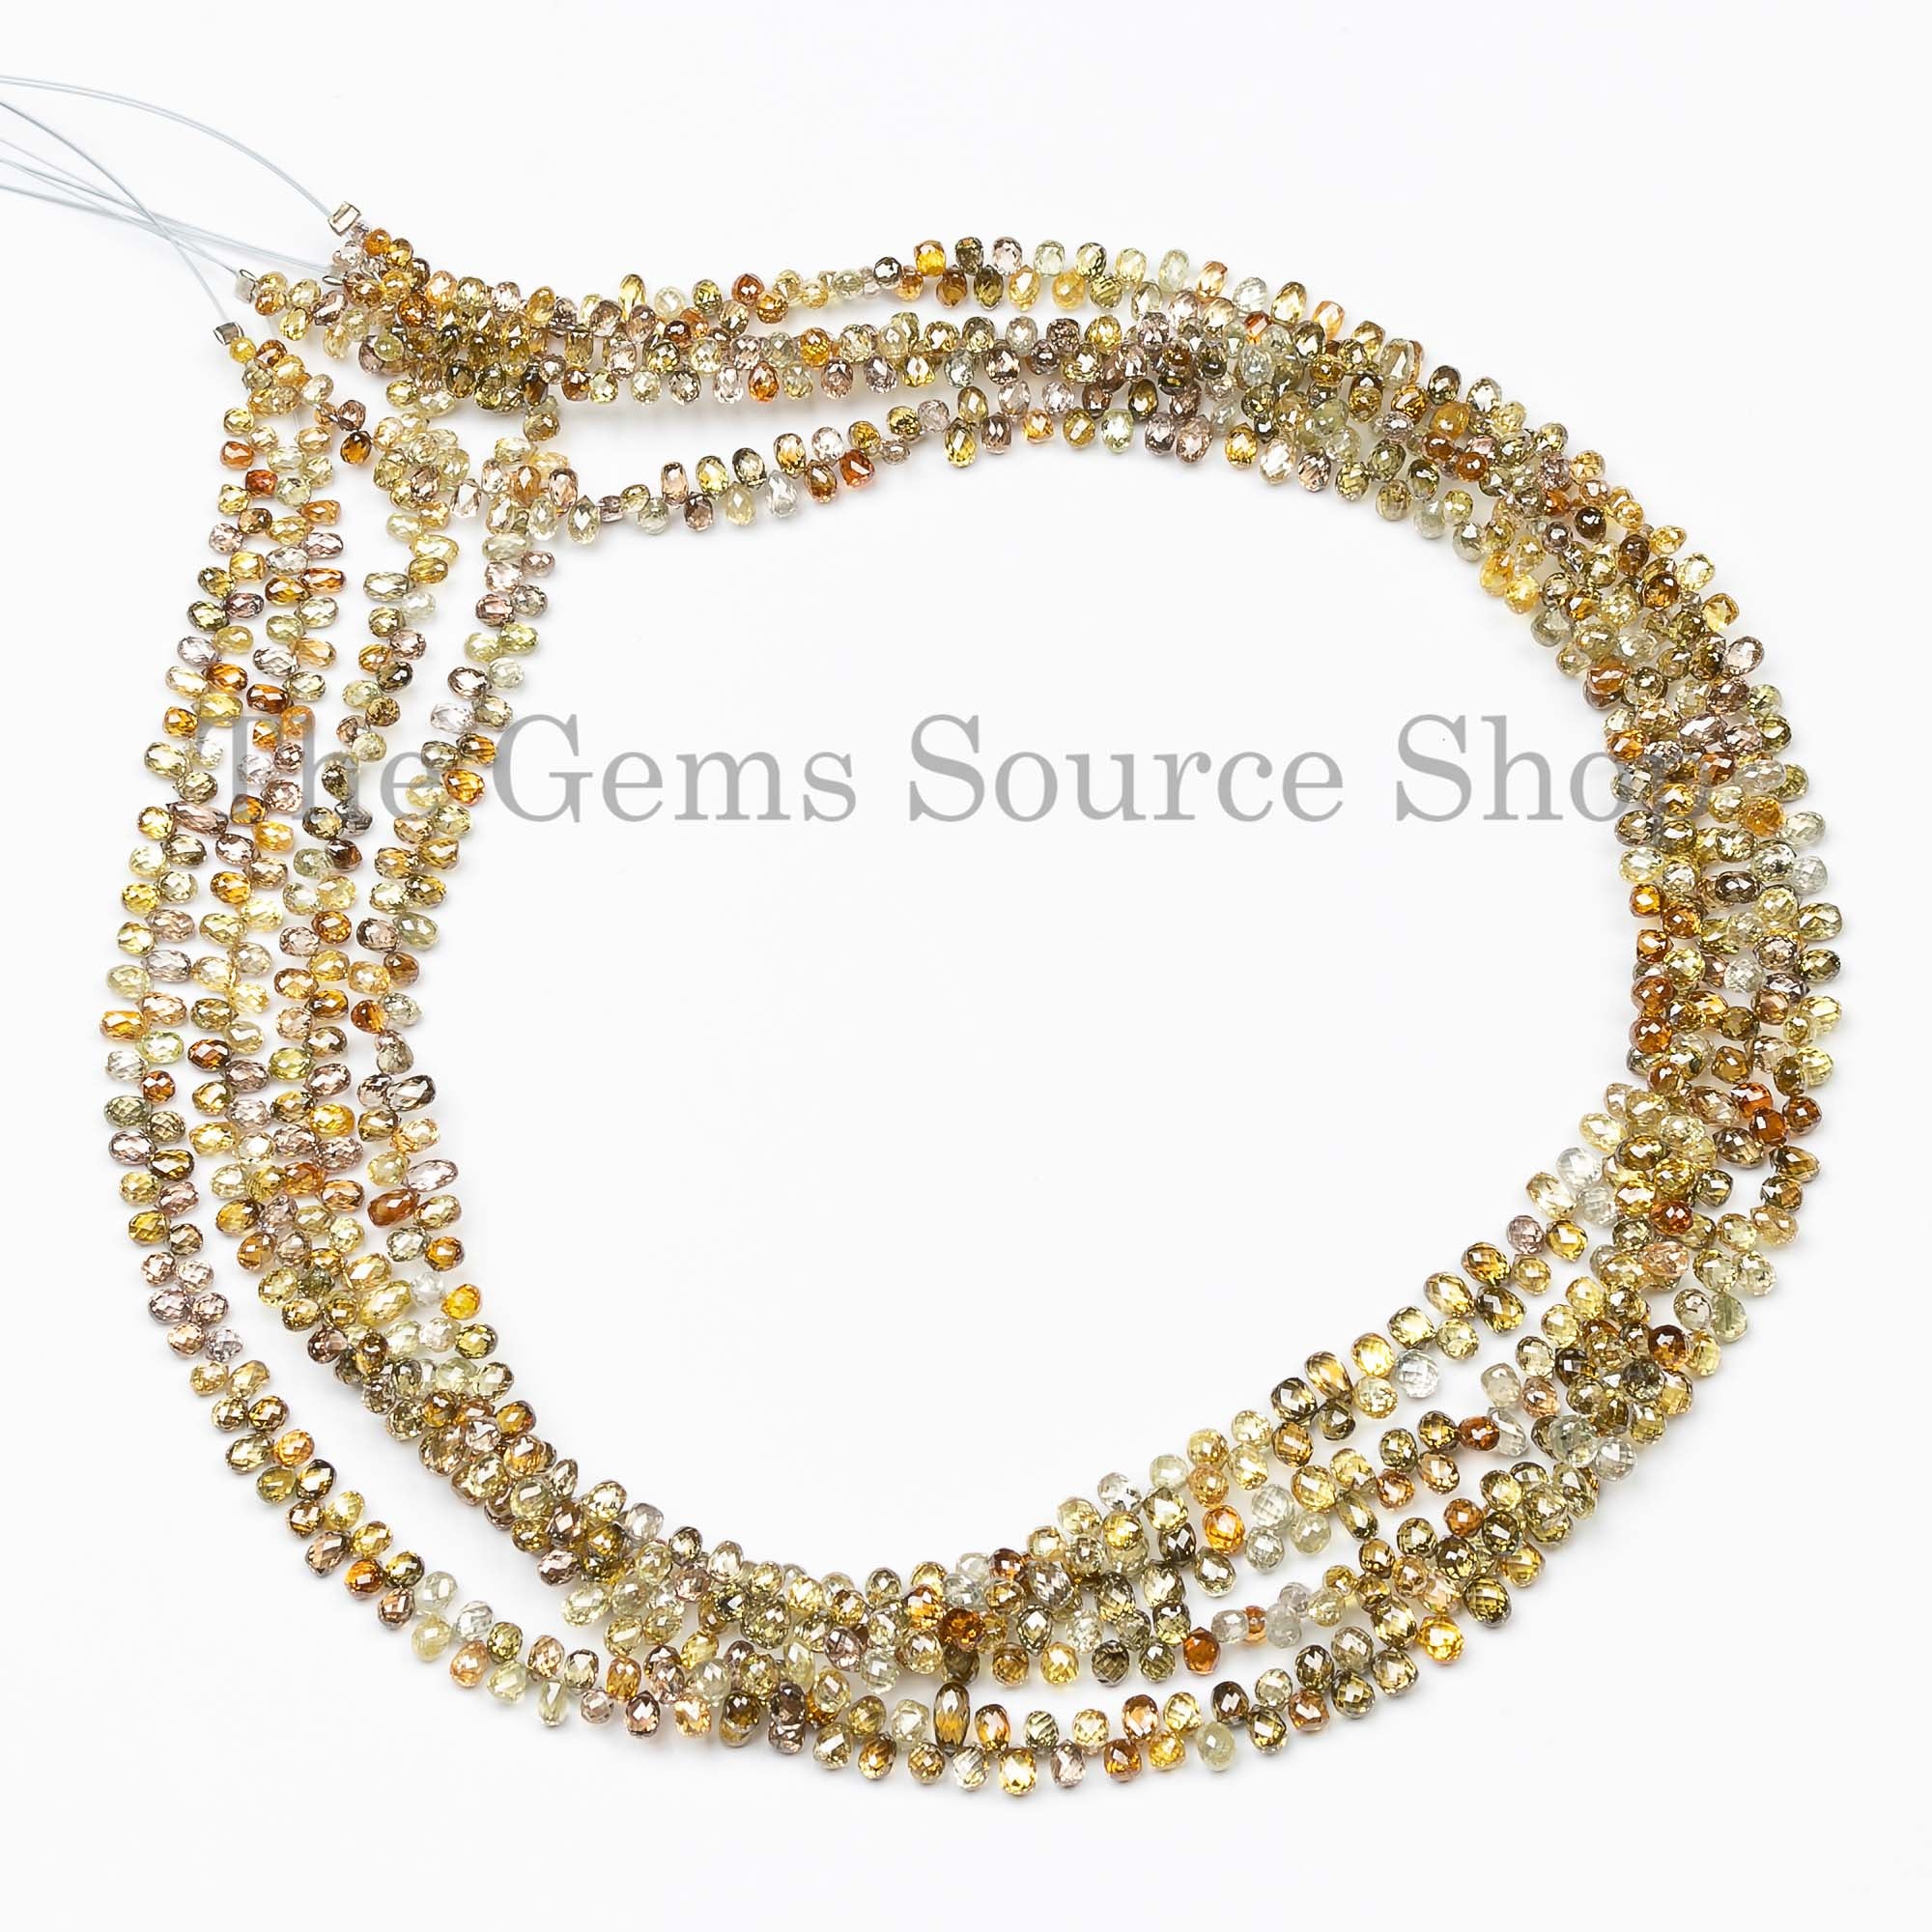 Exclusive High Quality Multi Color Sparkling Diamond Drop Beads, Diamond Faceted Beads